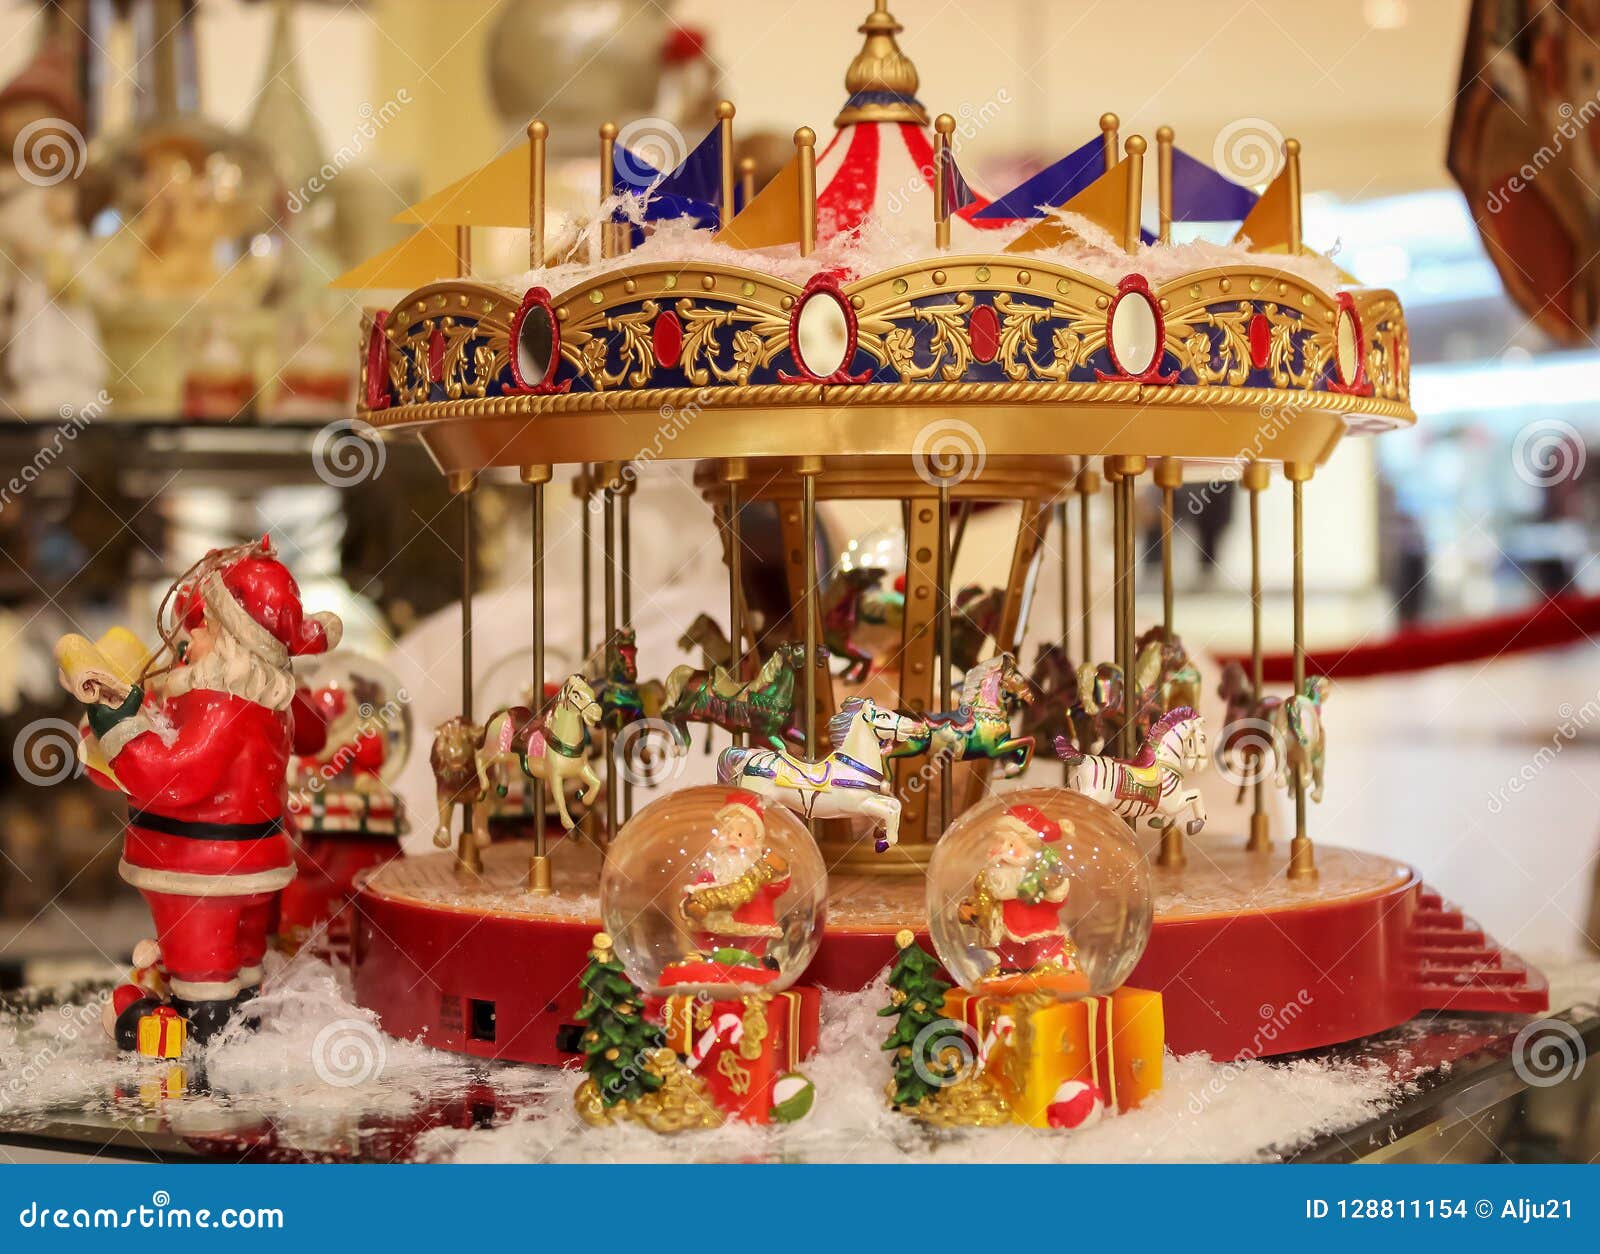 Unique carousel christmas decoration ideas for your holiday decor